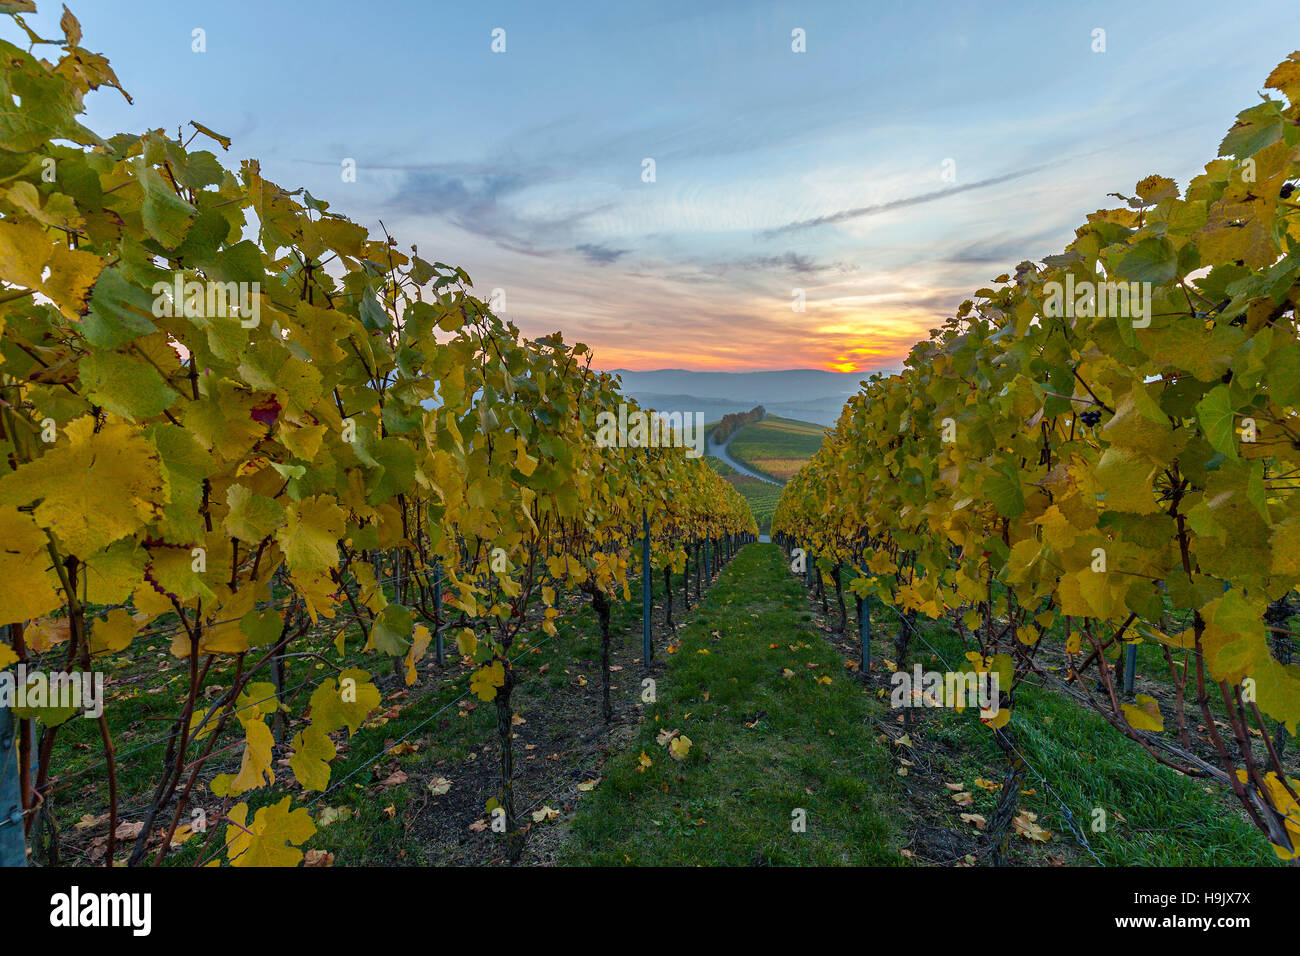 Germany, Baden-Wuerttemberg, Michelbach, vineyard in the evening Stock Photo